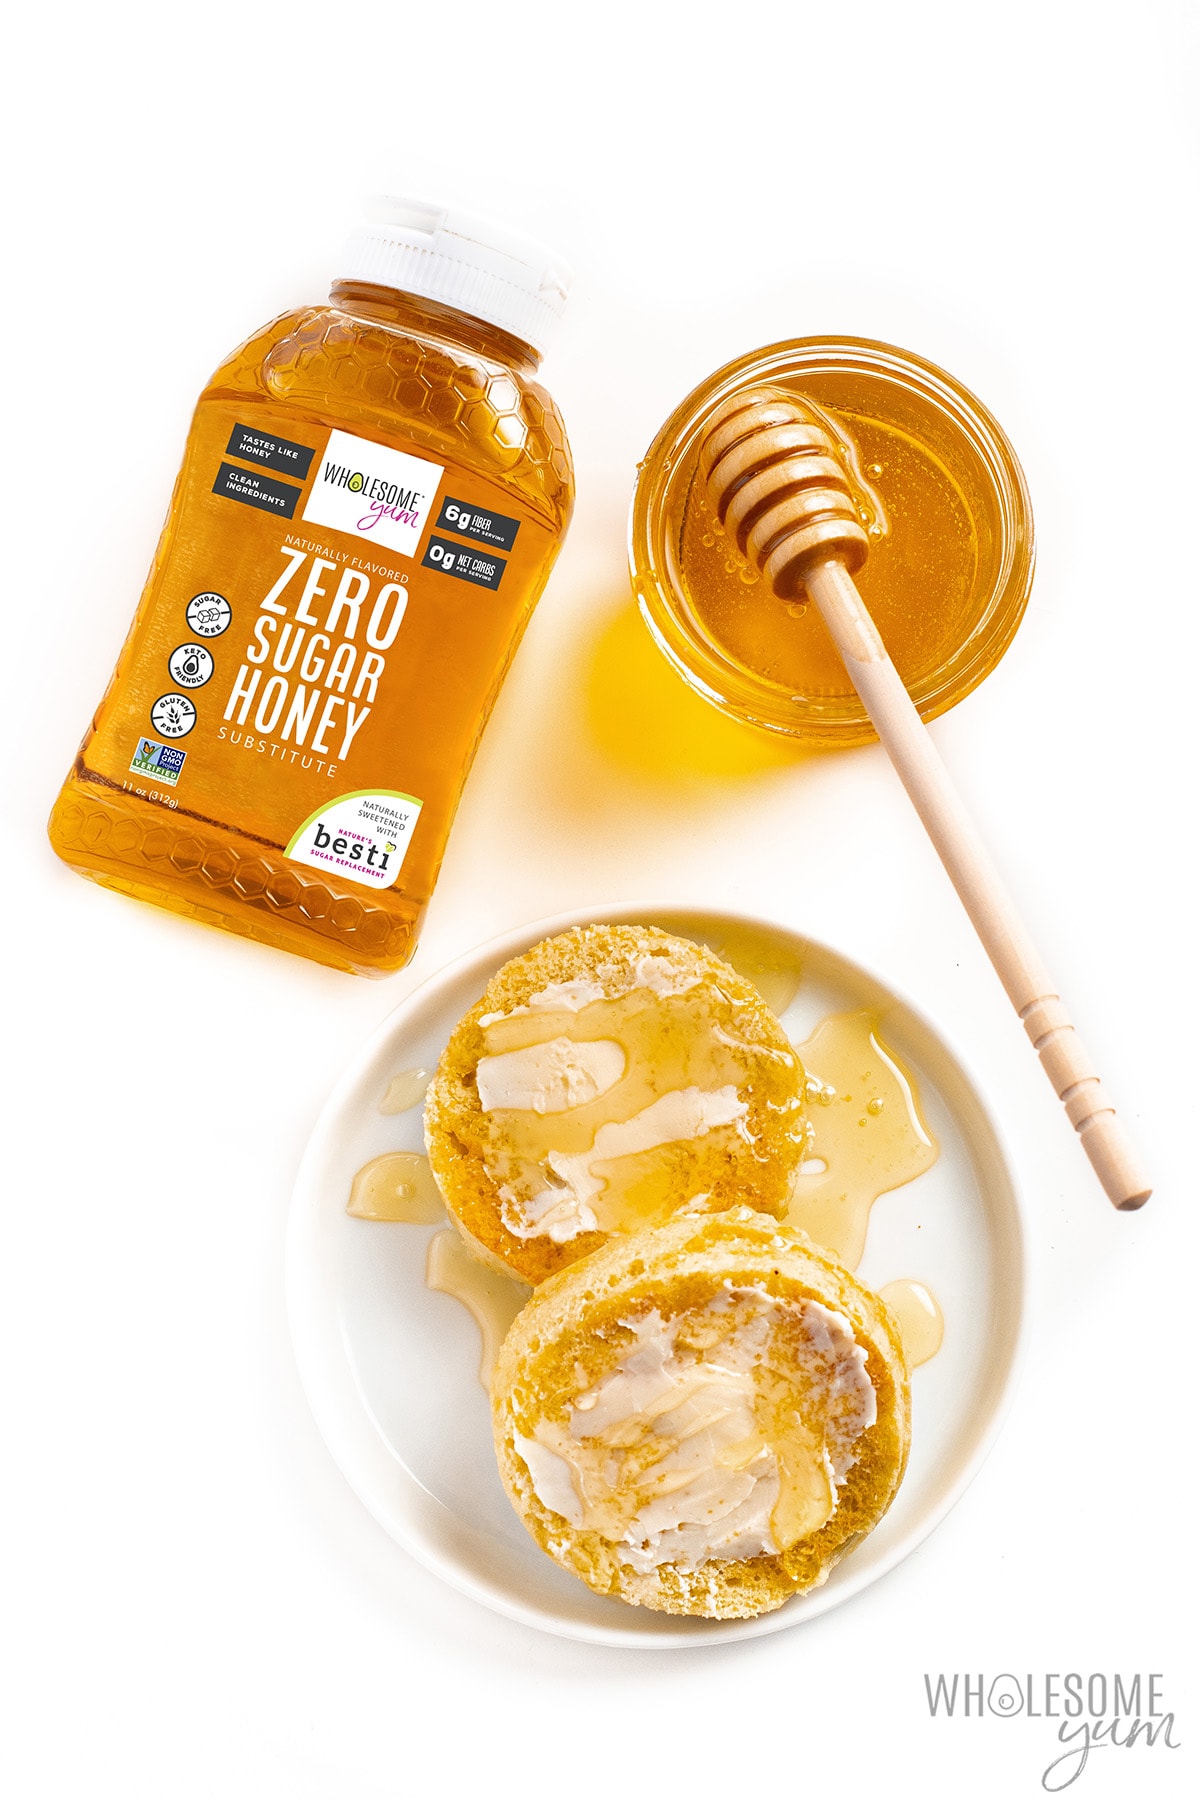 Zero sugar honey substitute on a low carb English muffin.